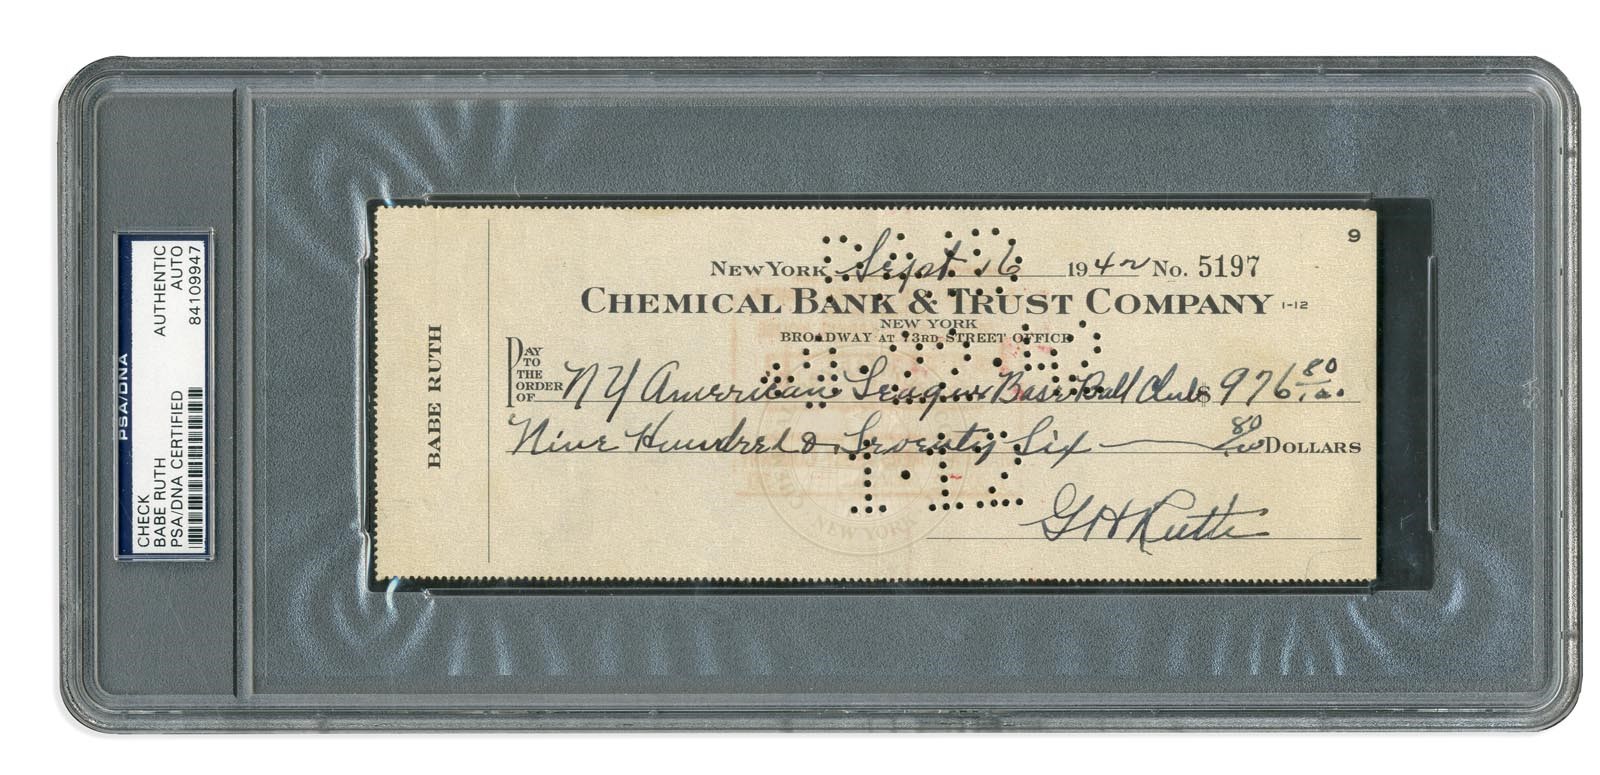 Collection Of Babe Ruth's Right Hand Man - 1942 Babe Ruth Bank Check Made Out To The New York Yankees (PSA)